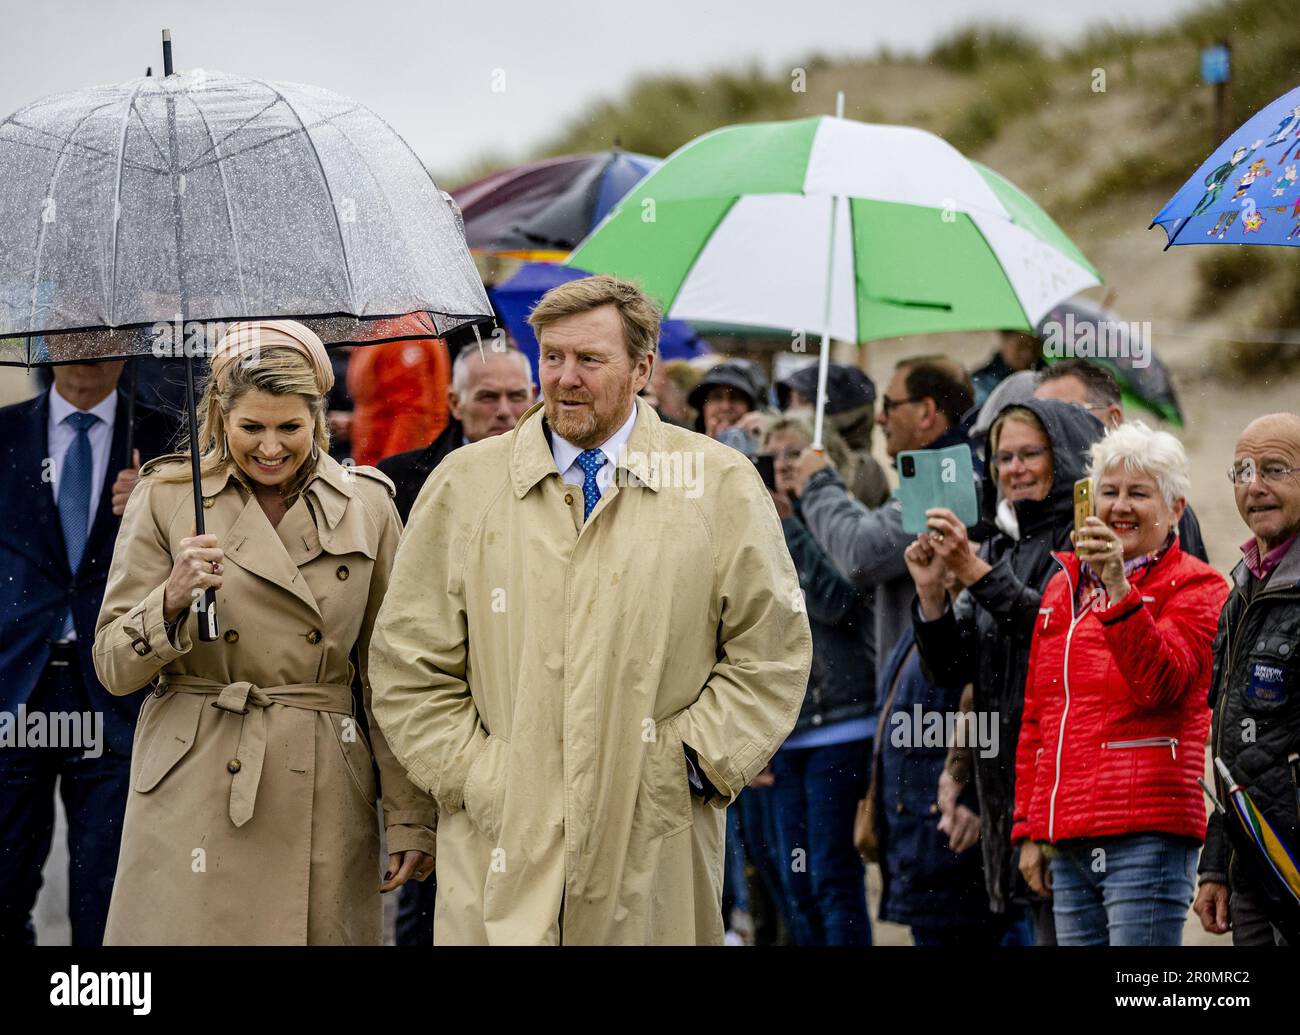 DEN HOORN - King Willem-Alexander and Queen Maxima arrive at Beach Pavilion Paal 9. The royal couple is paying a two-day regional visit to the Wadden Islands. ANP SEM VAN DER WAL netherlands out - belgium out Credit: ANP/Alamy Live News Stock Photo